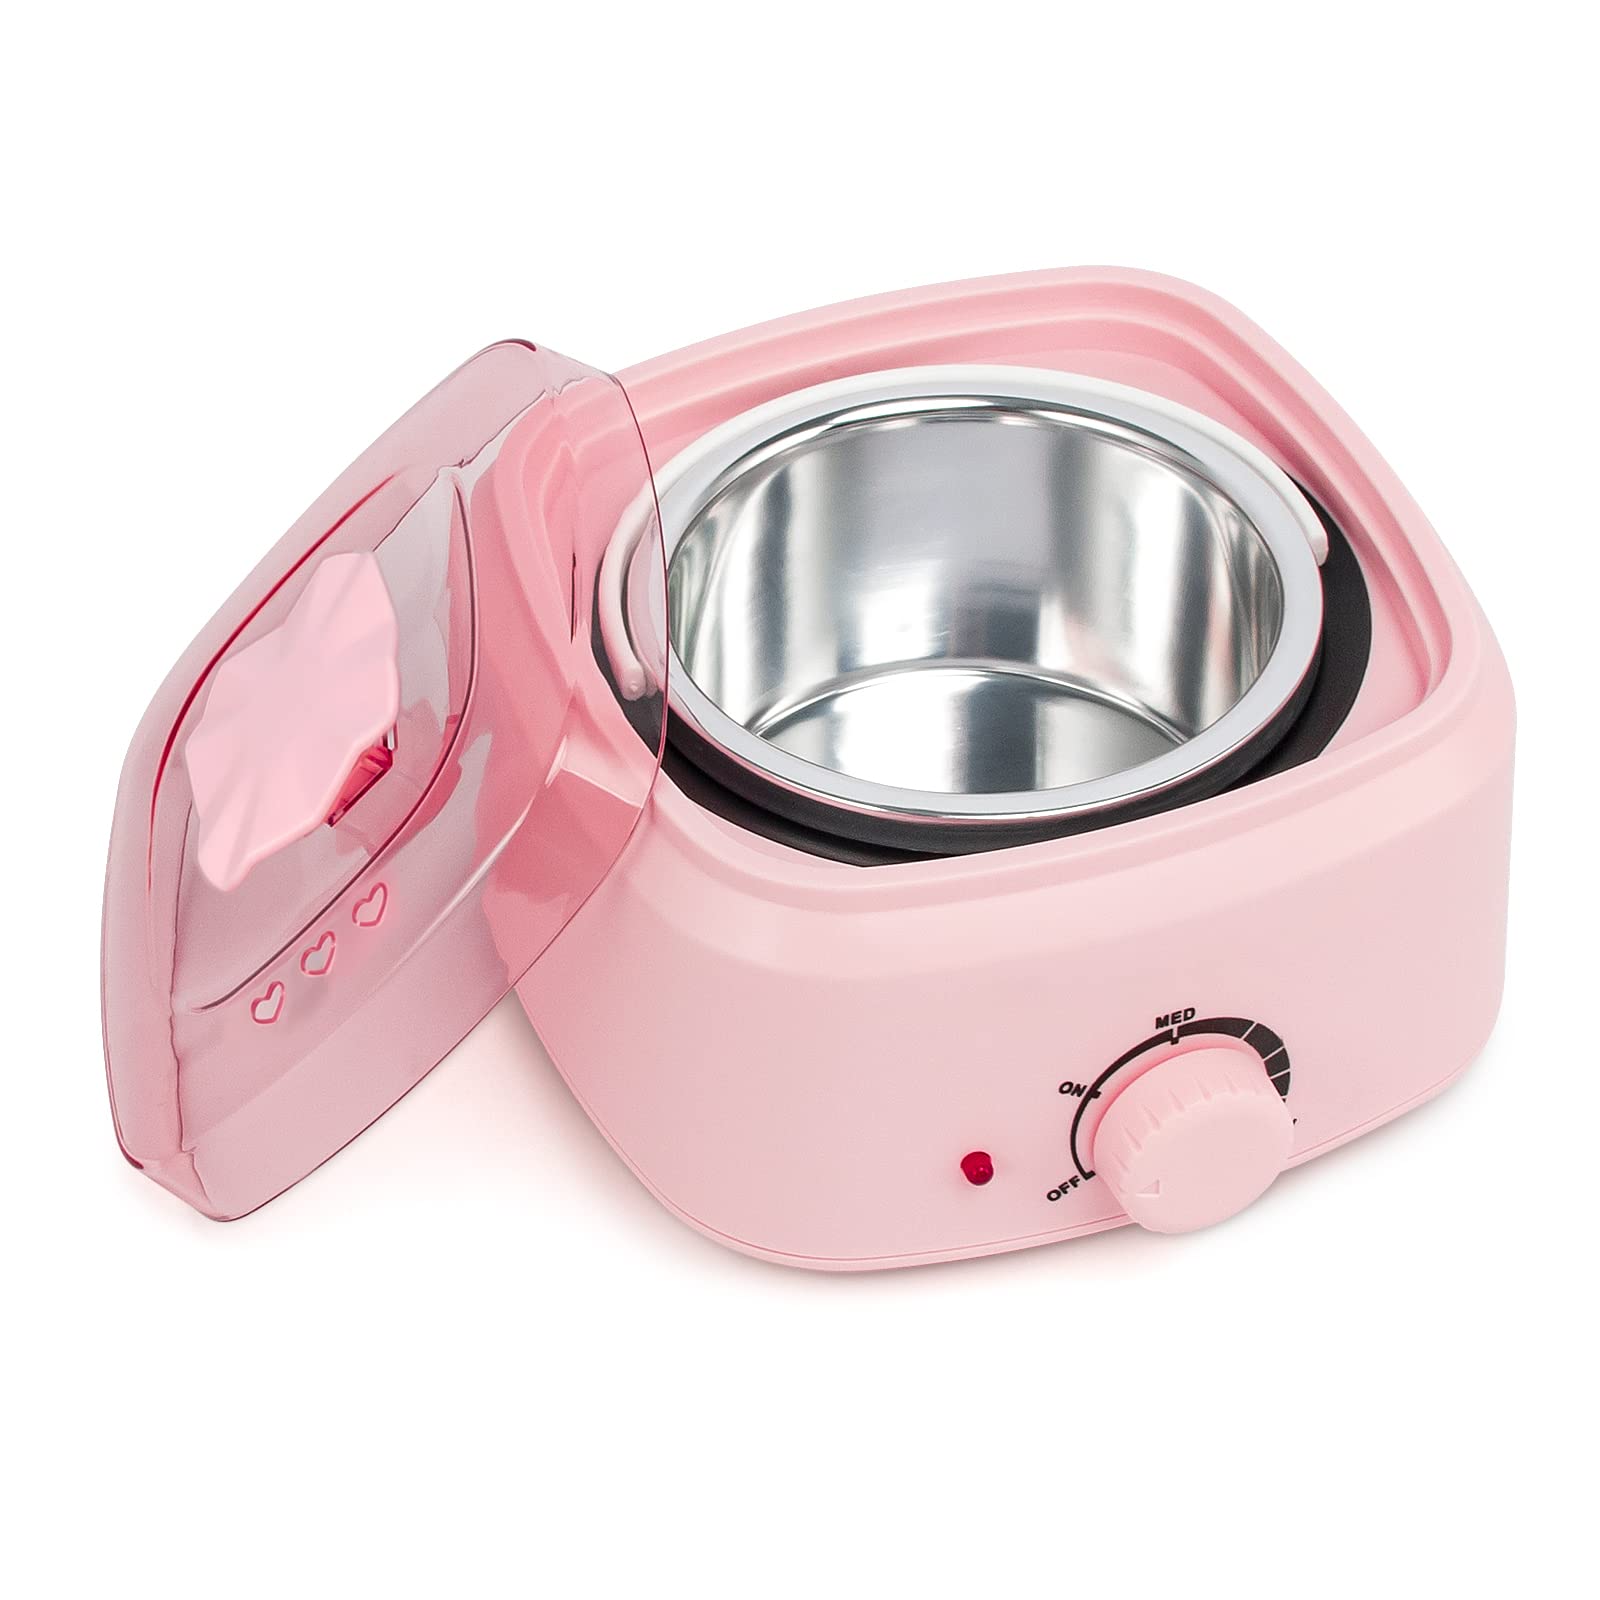 Wax Warmer for Hair Removal Melting Wax Pot Waxing Kit Wax Machine Portable  Professional Hot Wax Warmer for Women Home Use(500ML-Pink)